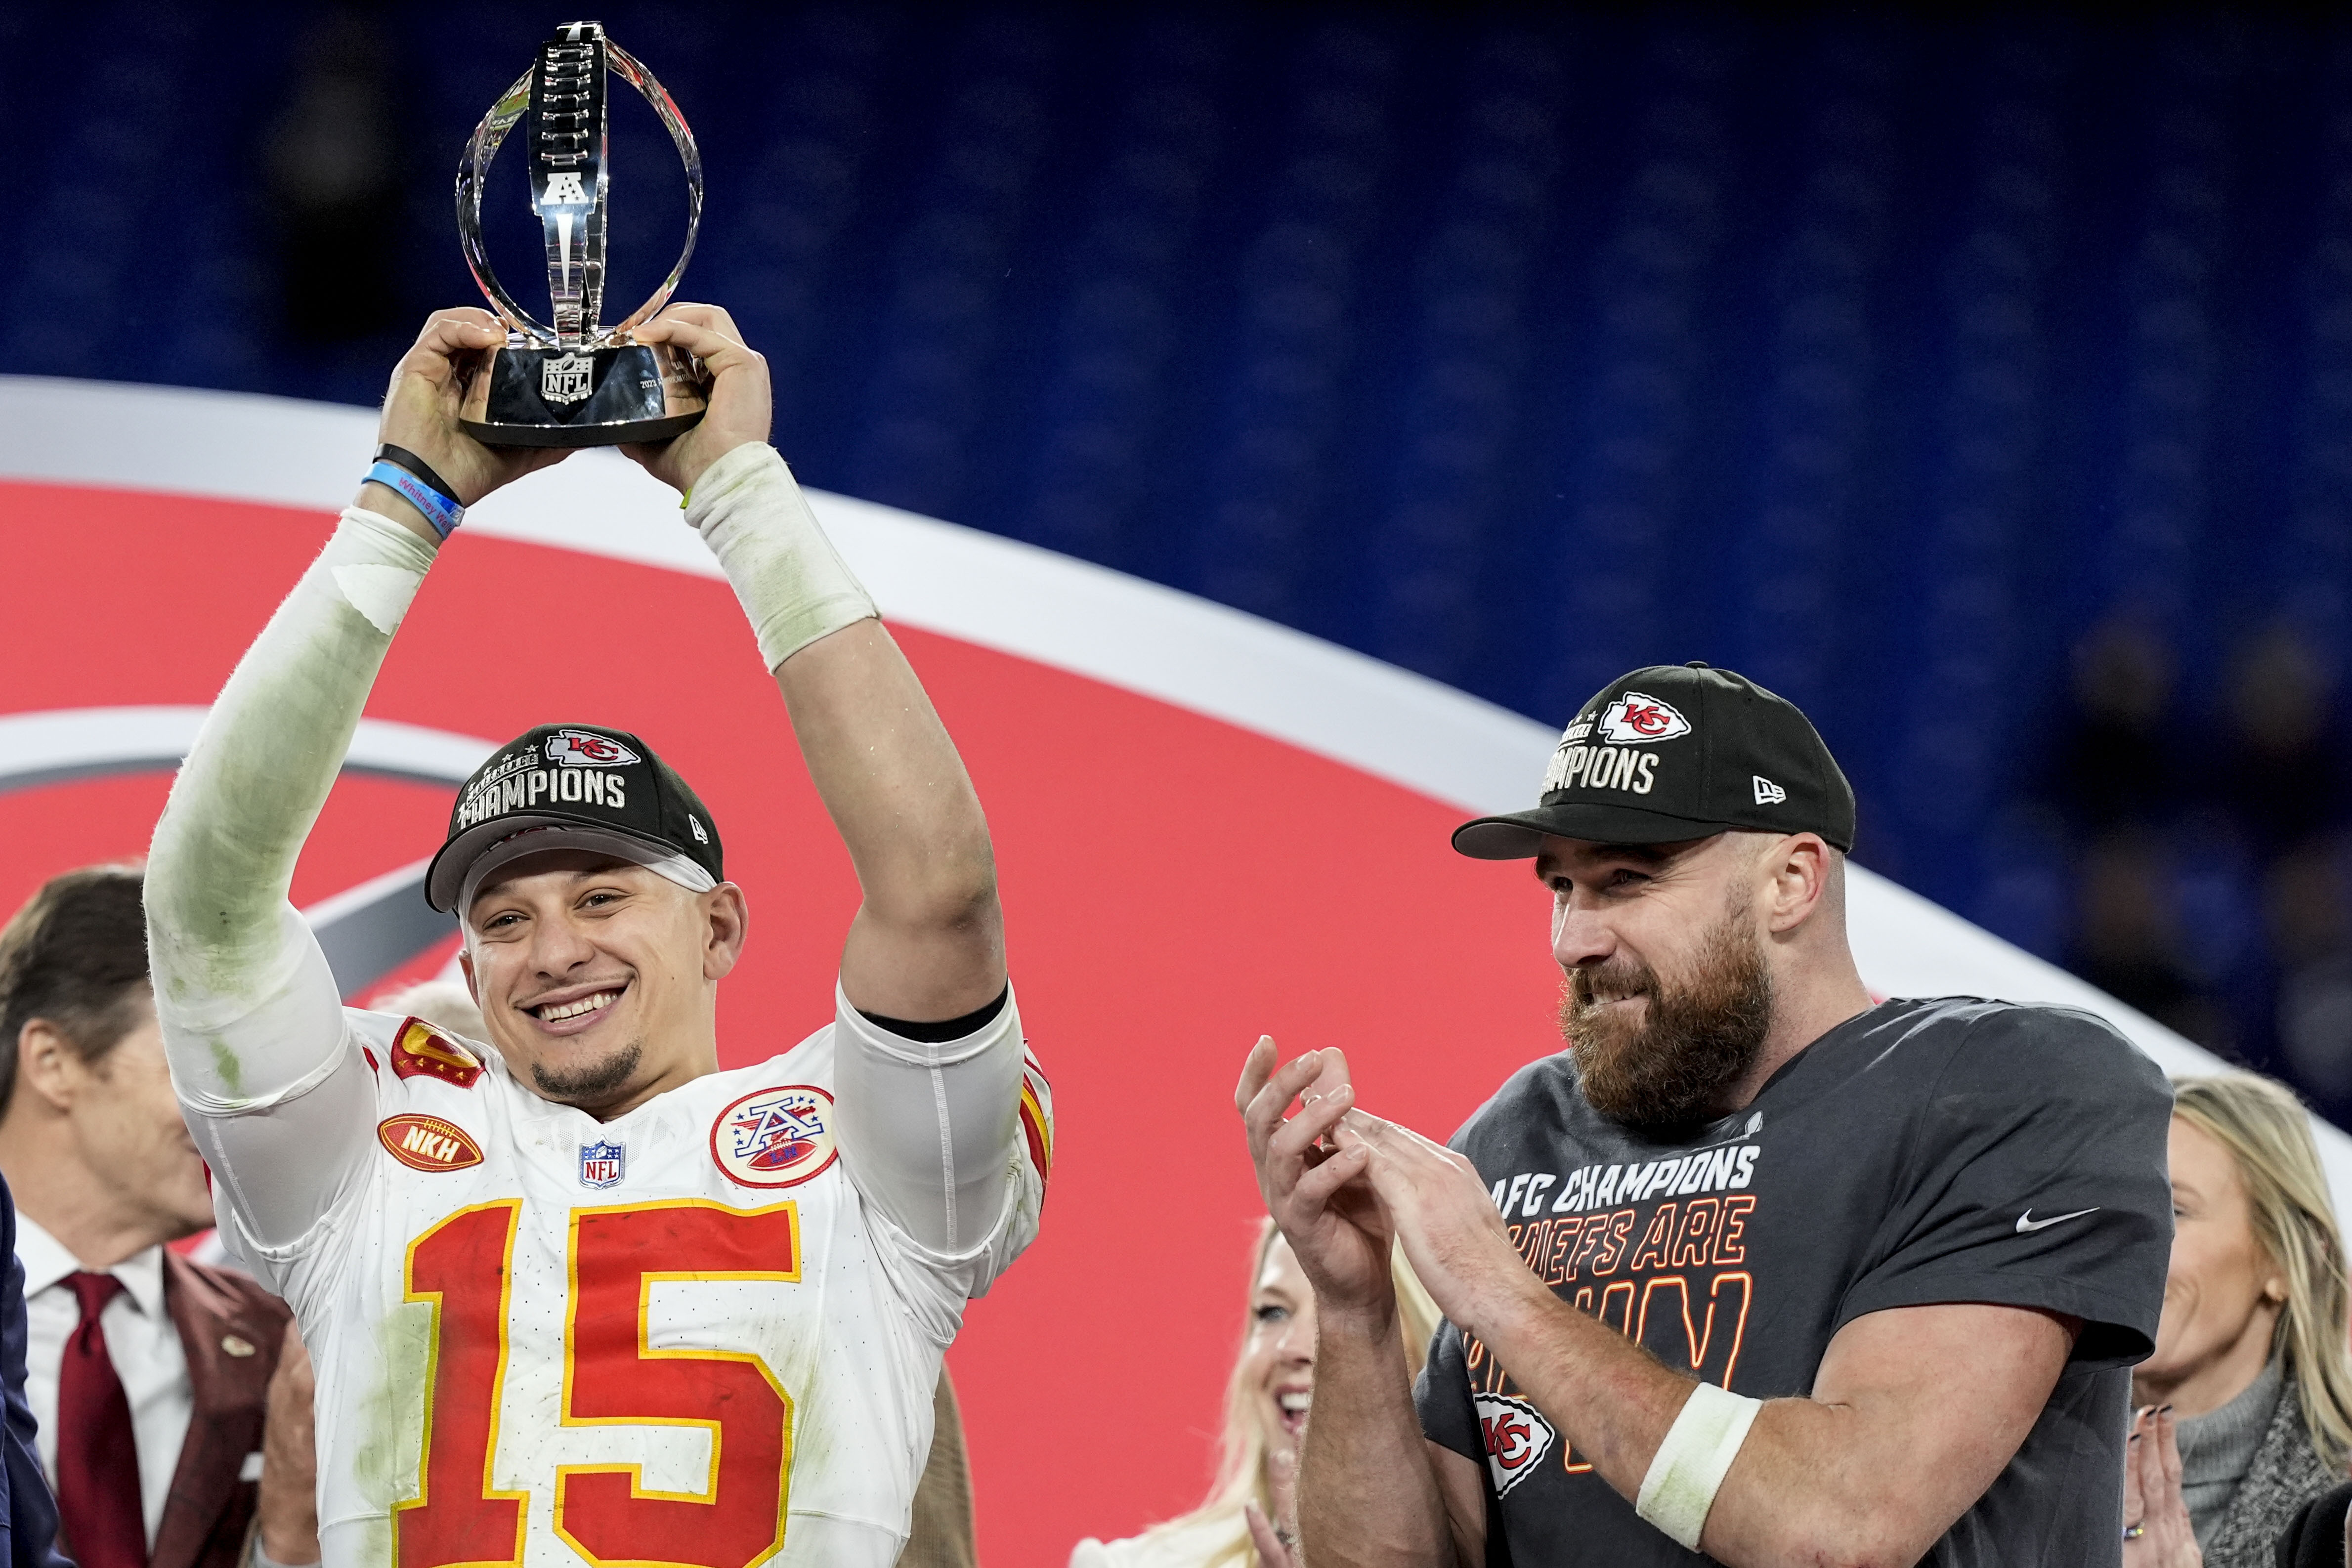 The Chiefs have Patrick Mahomes at QB and they’re still Super Bowl underdogs